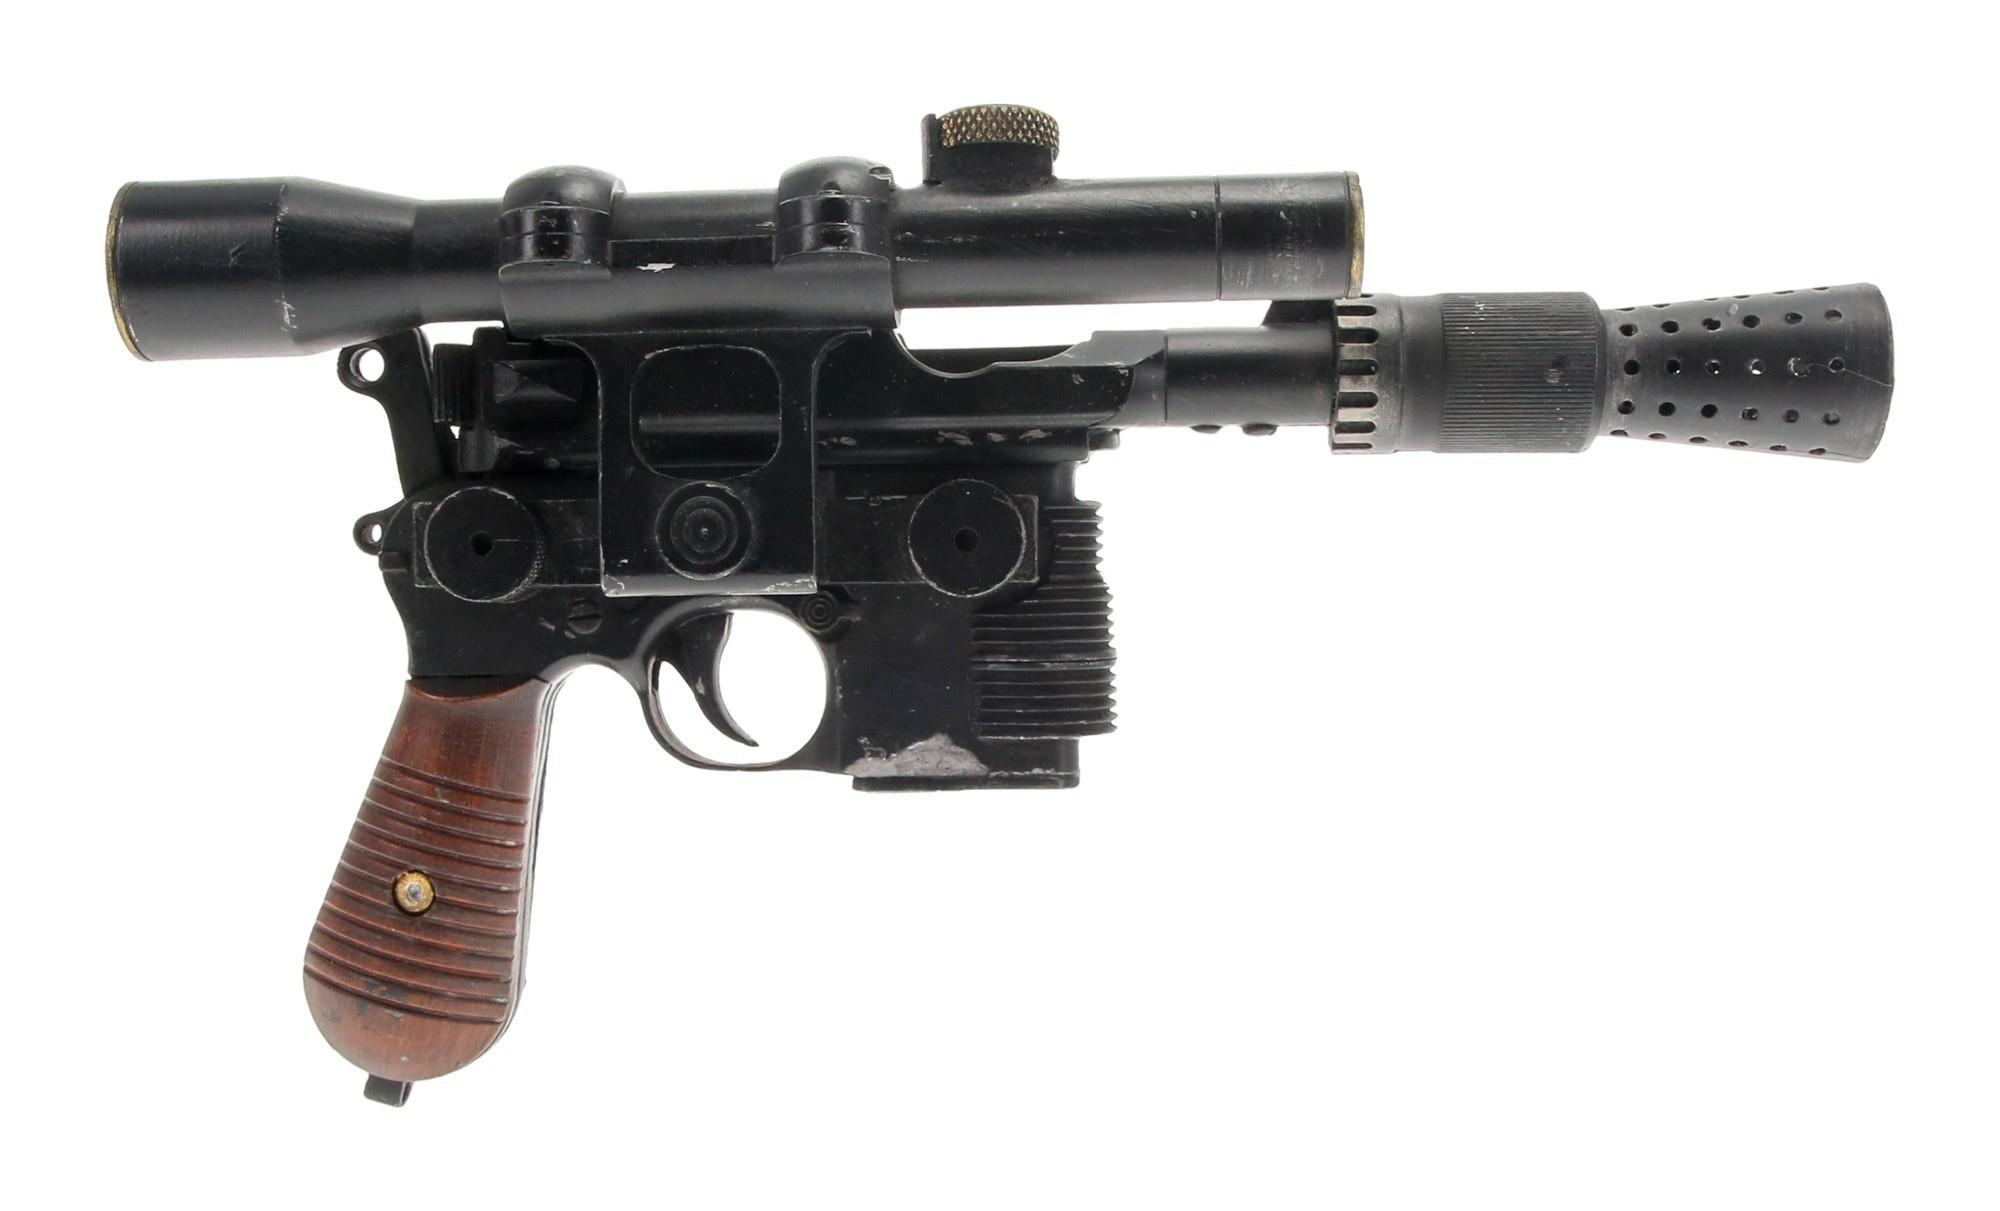 Han Solo's blaster weapon from the Star Wars films